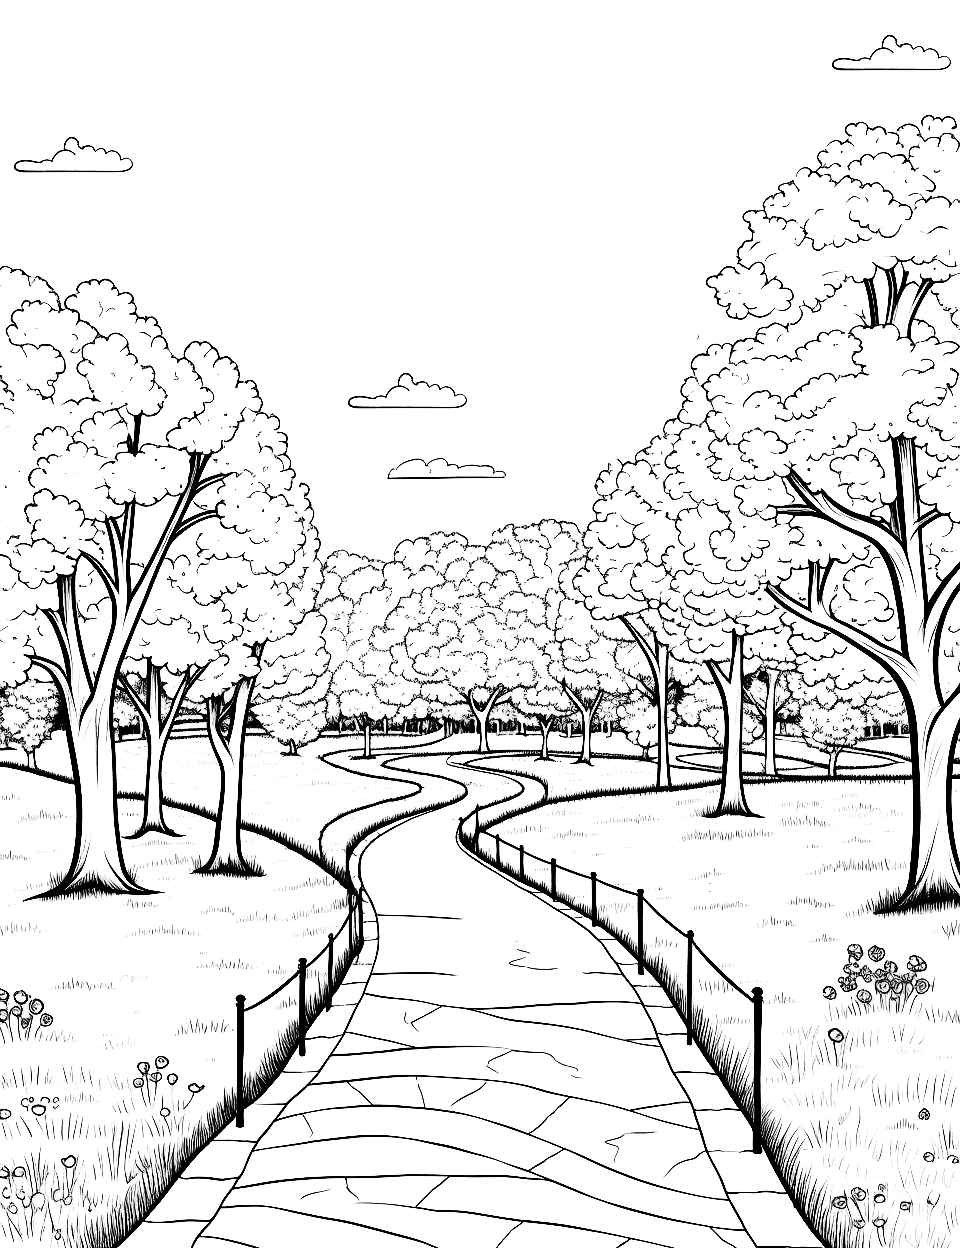 Cherry Blossom Park in Spring Nature Coloring Page - A park filled with blooming cherry blossom trees and a clear sky.